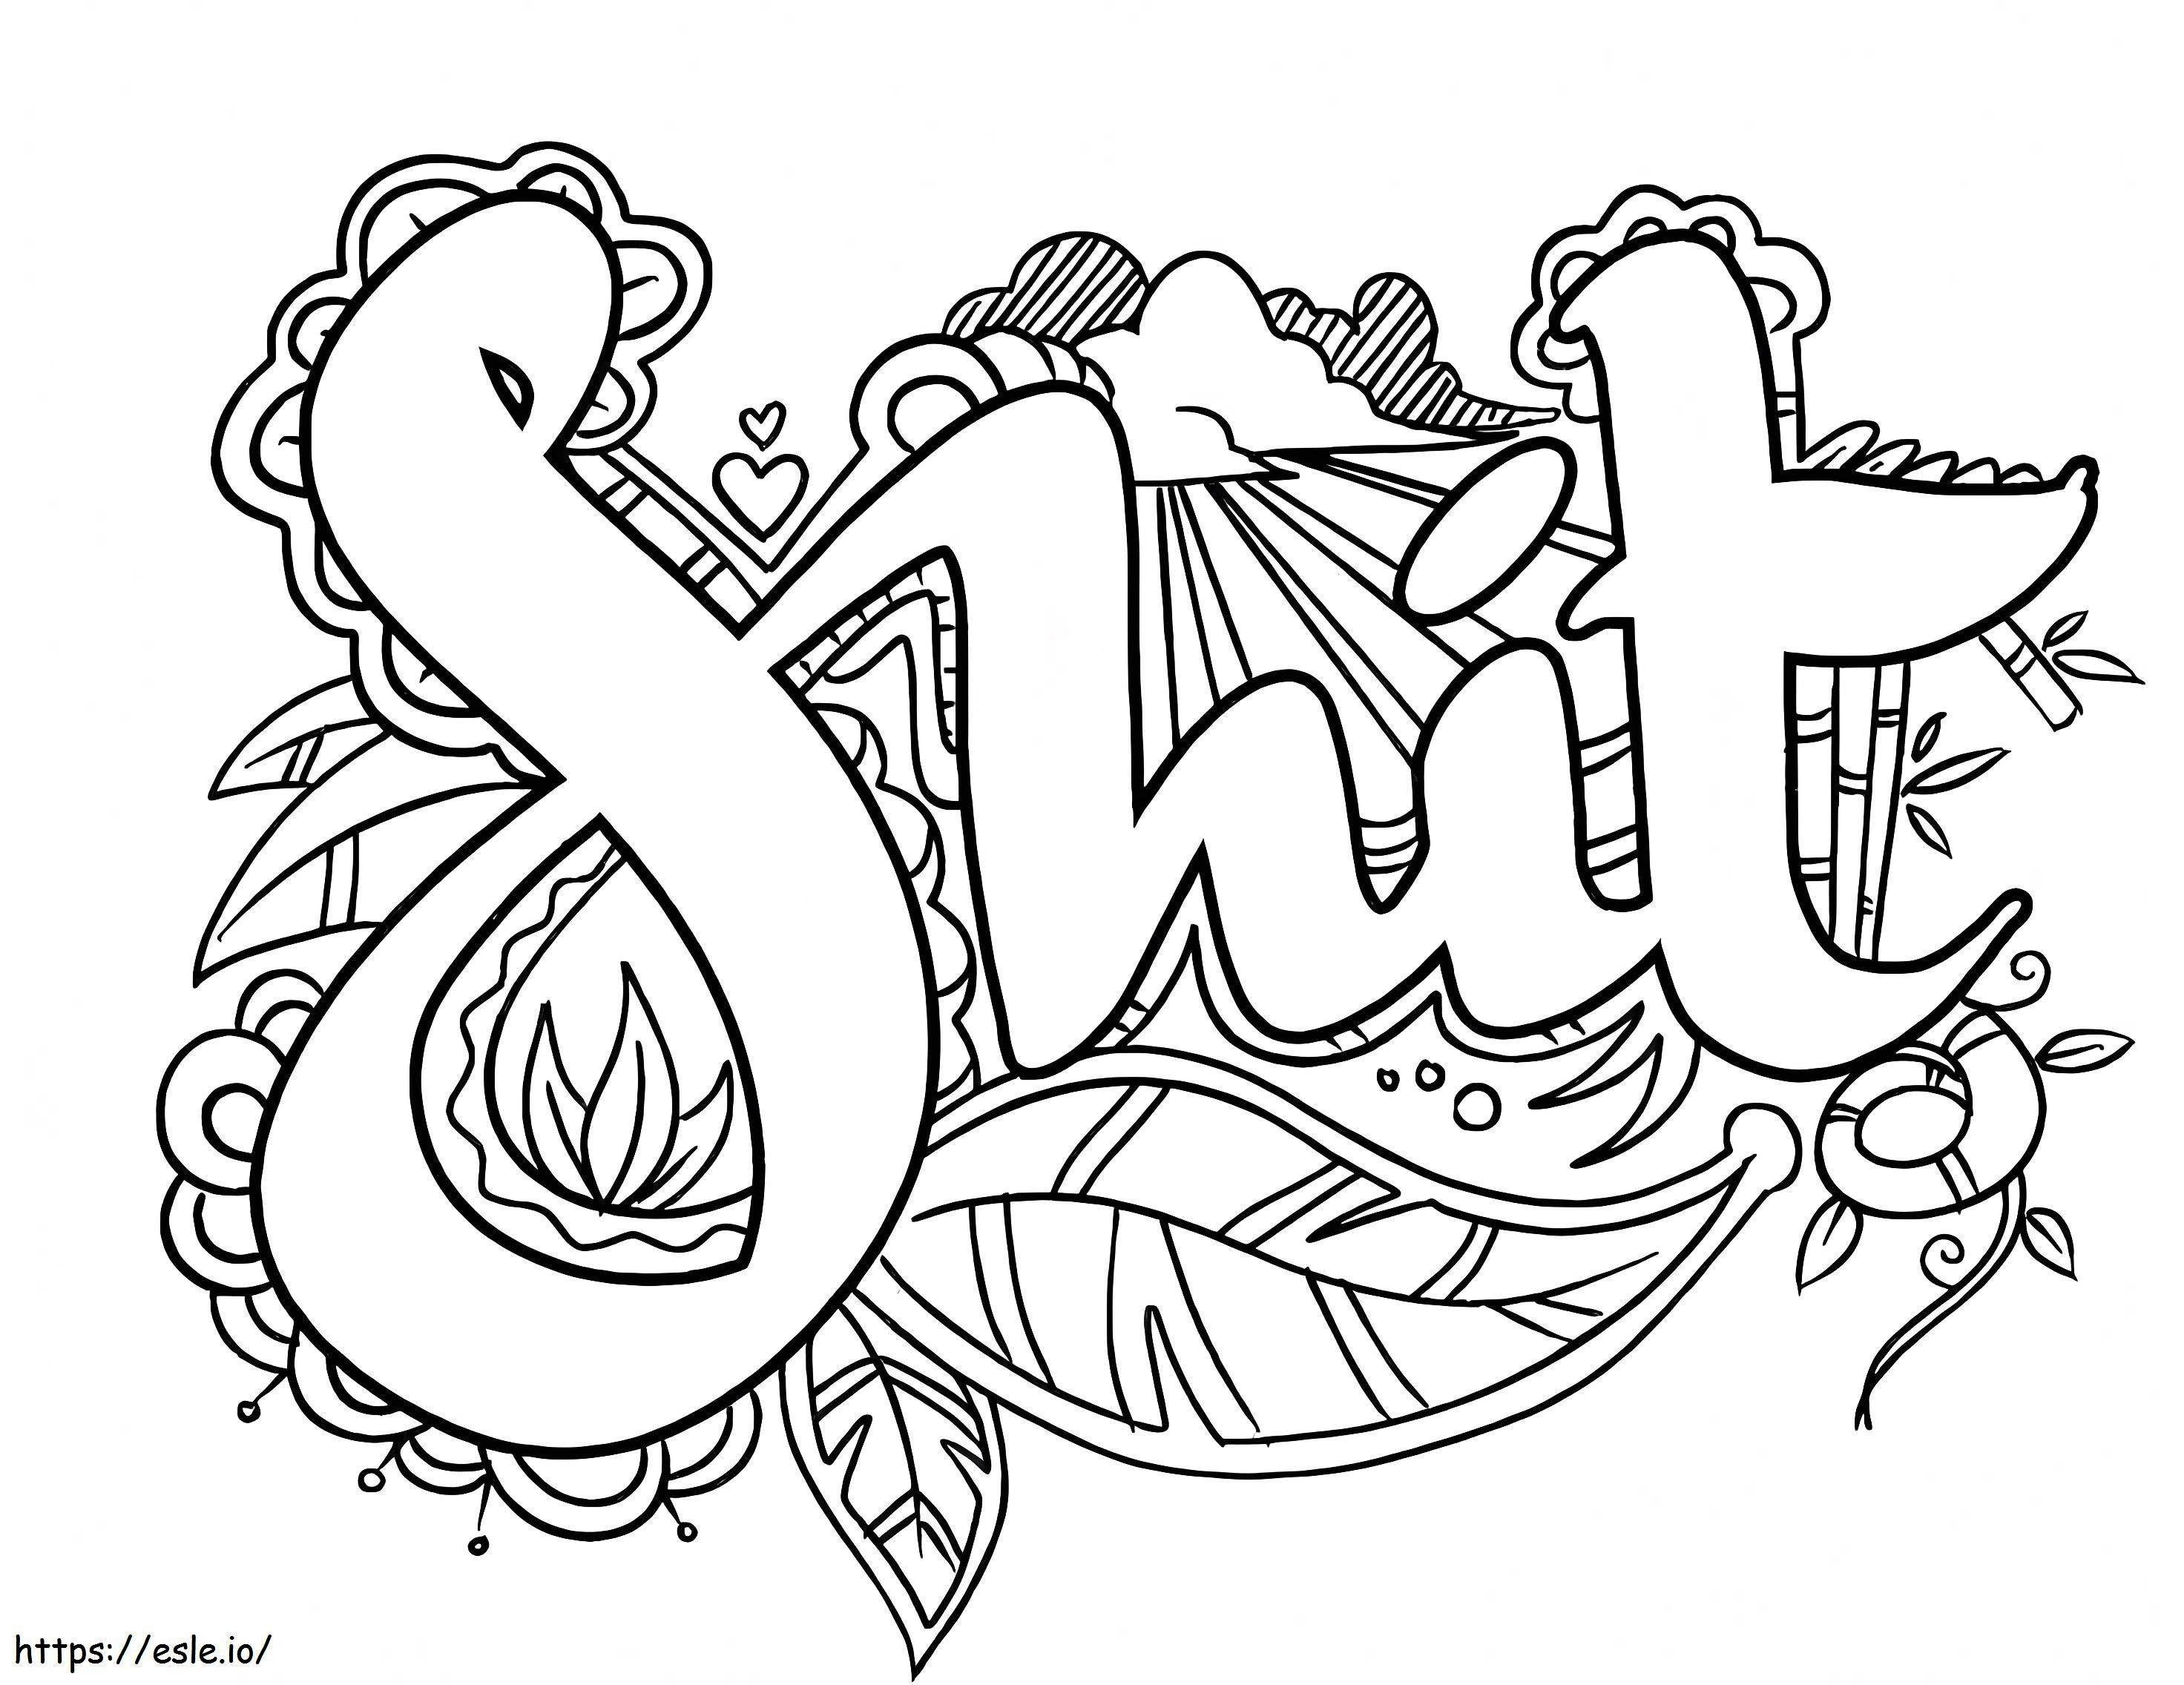 1578013336 Free For Adults To Print Coloring Printable Adults Adult Page Free Unique Ideas On Colouring Online Free Printable For Adults Only Fantasy coloring page